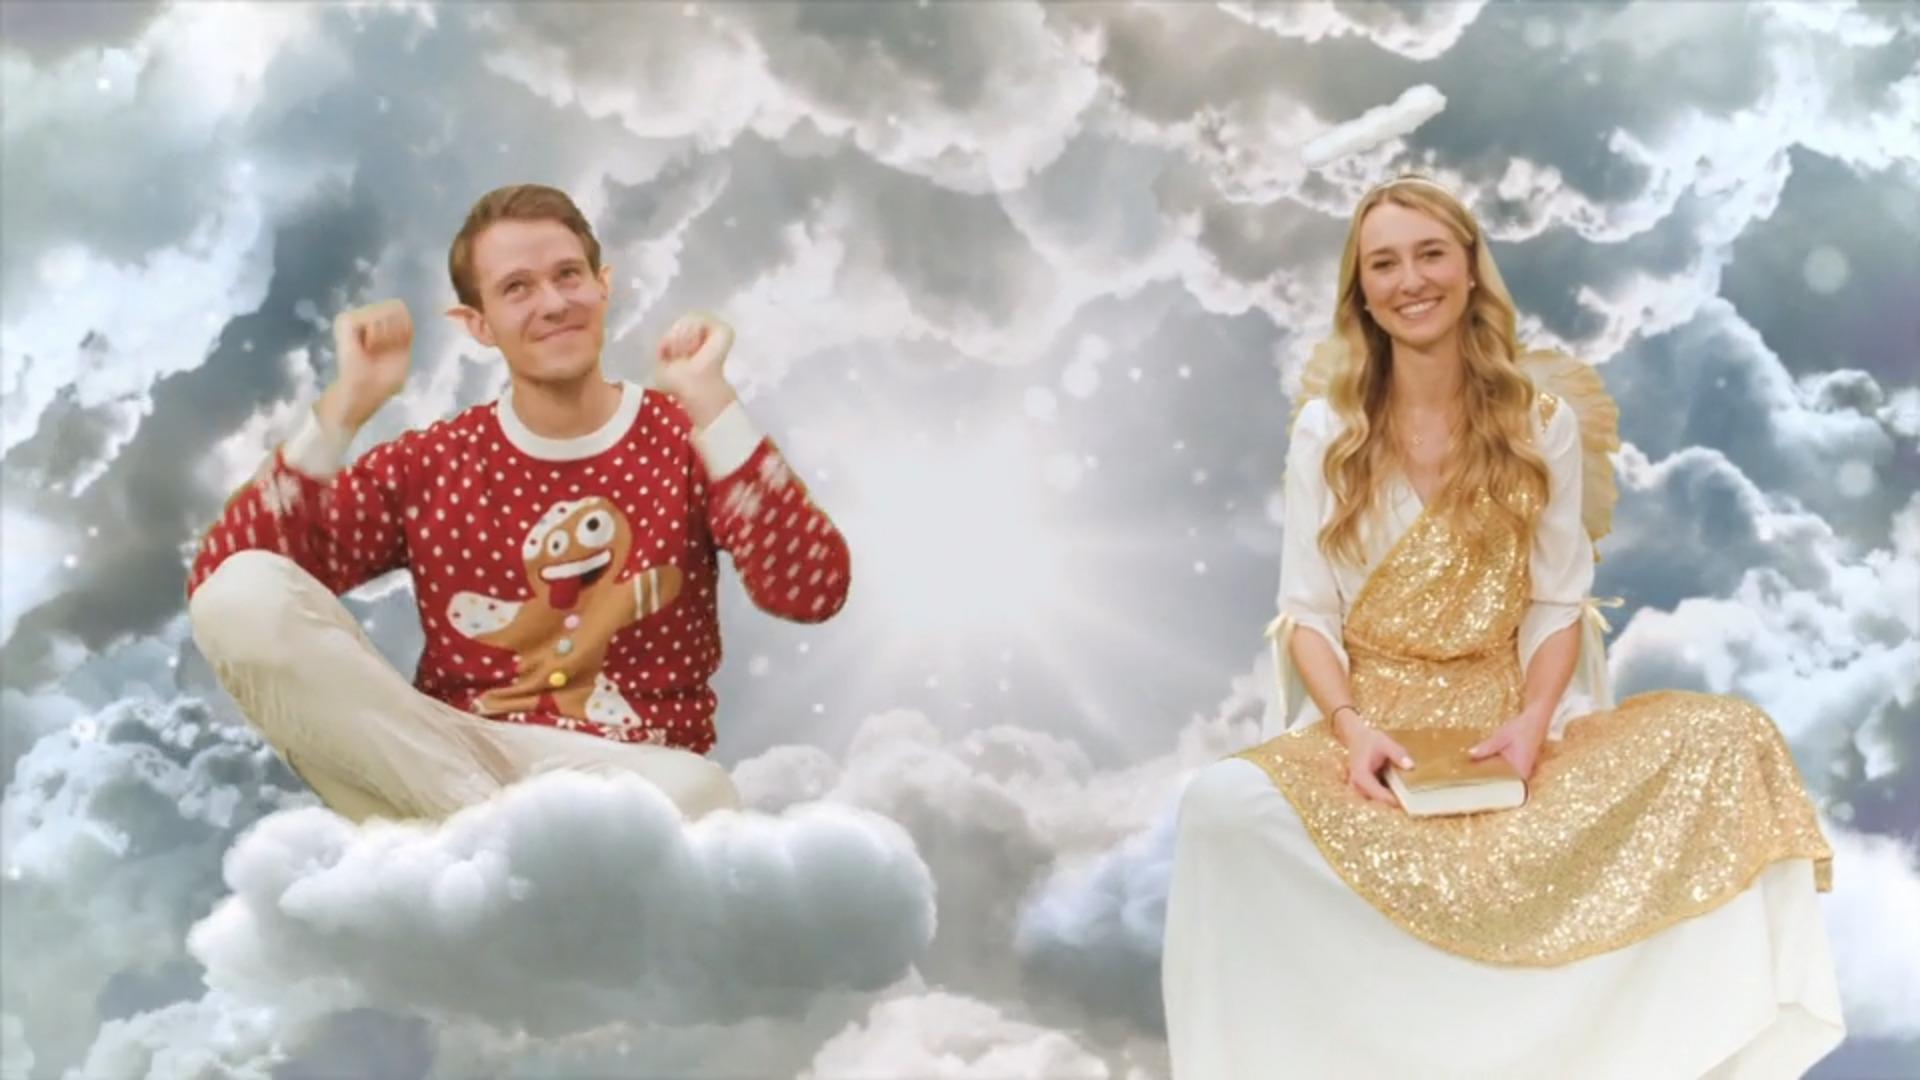 RTL reporters become Christmas angels In a race against time: RTL Christmas duel